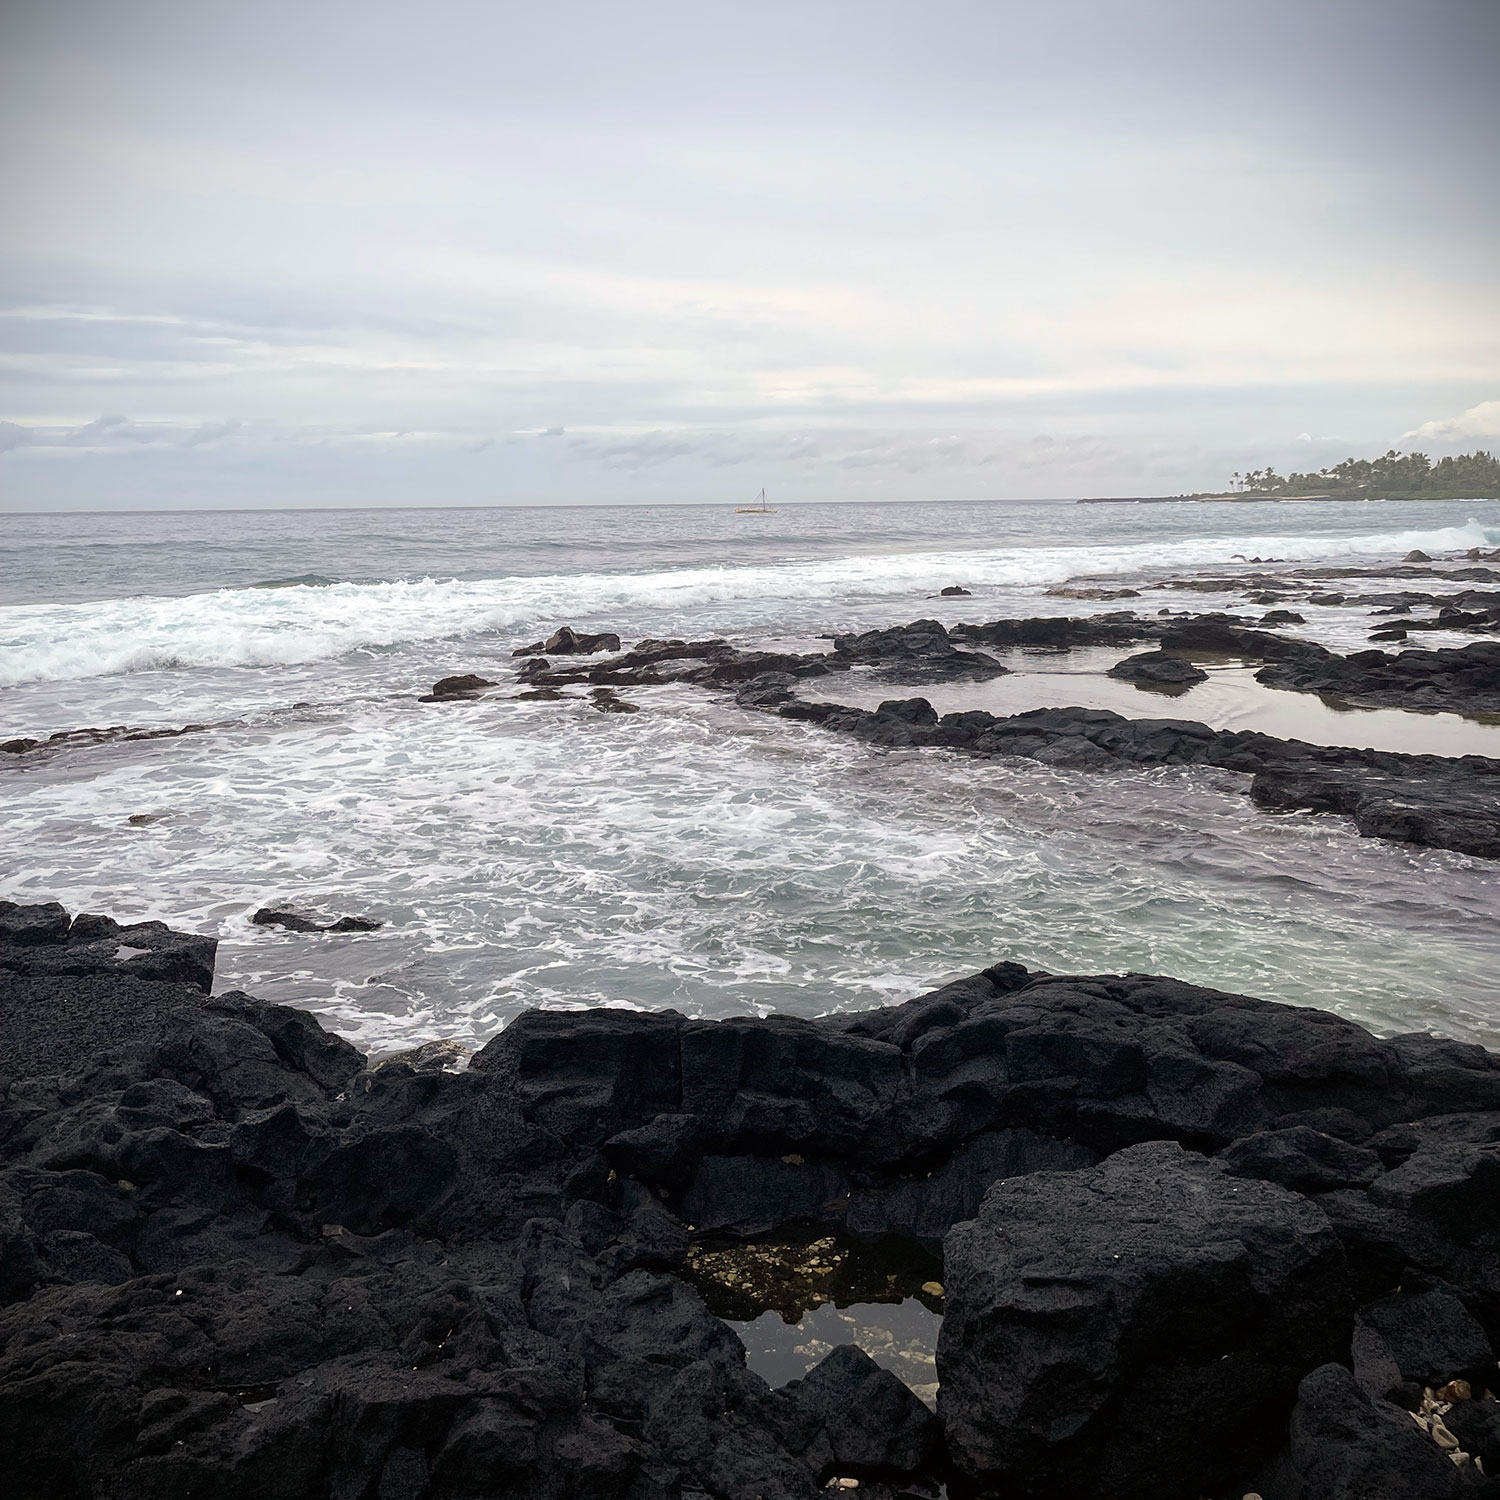 A view of the Pacific looking more or less west from Kailua Kona on a cloud day; black lava rocks in the foreground, blue water, and slate sky, with a narrow, blurred line of a land and palm trees in the distance.